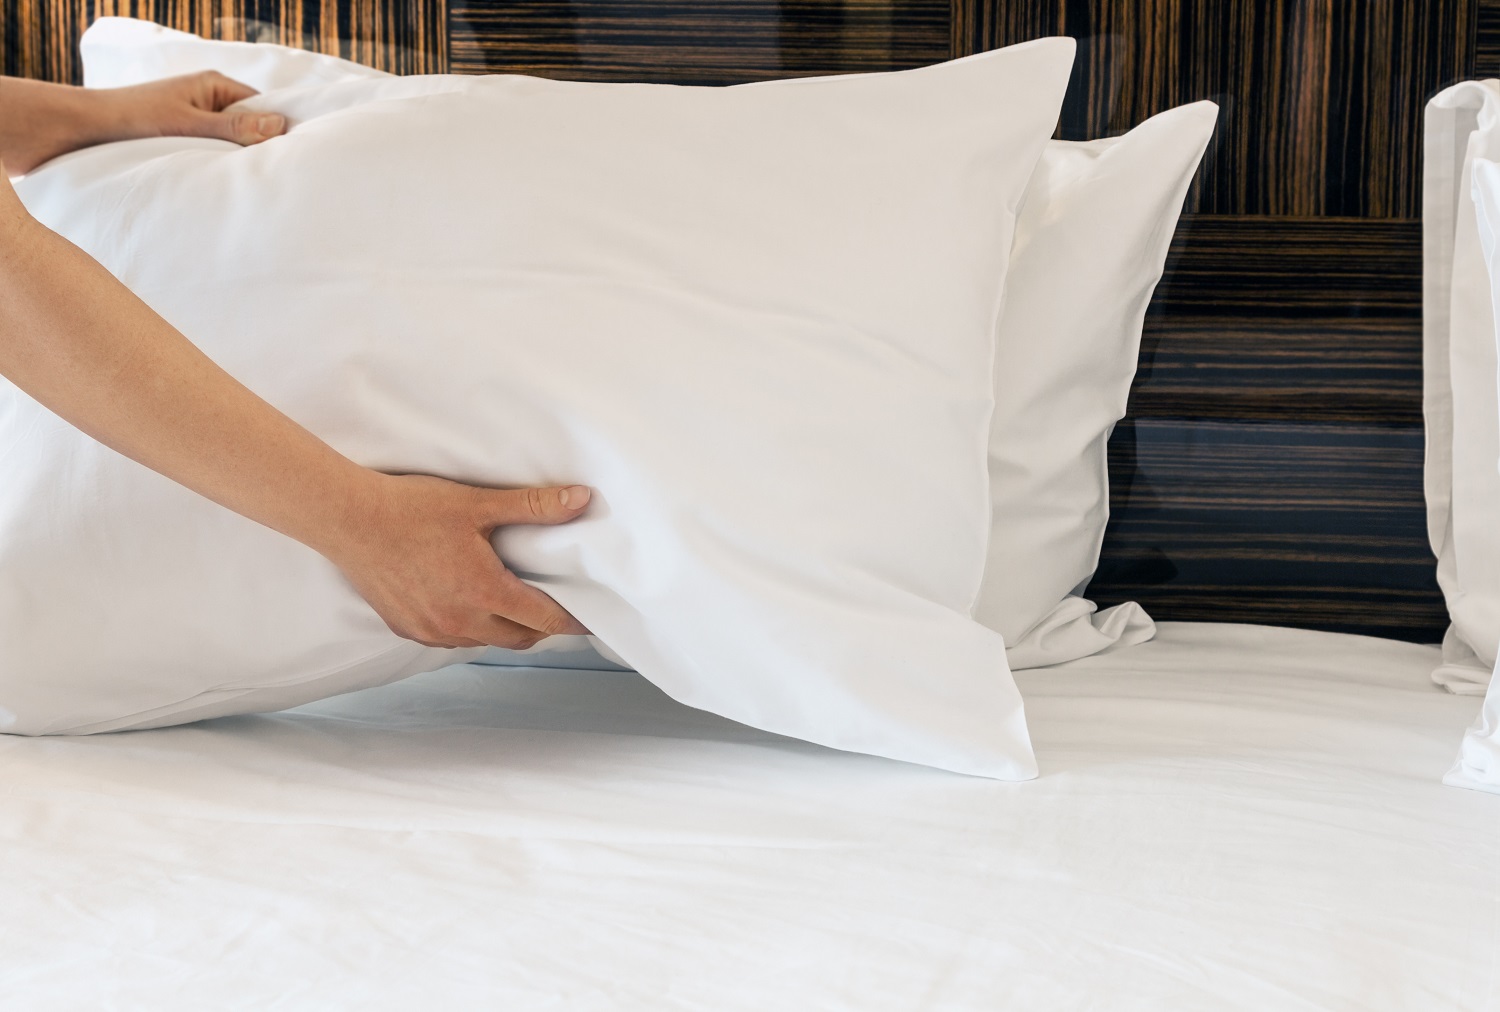 a person fluffing a bed pillow